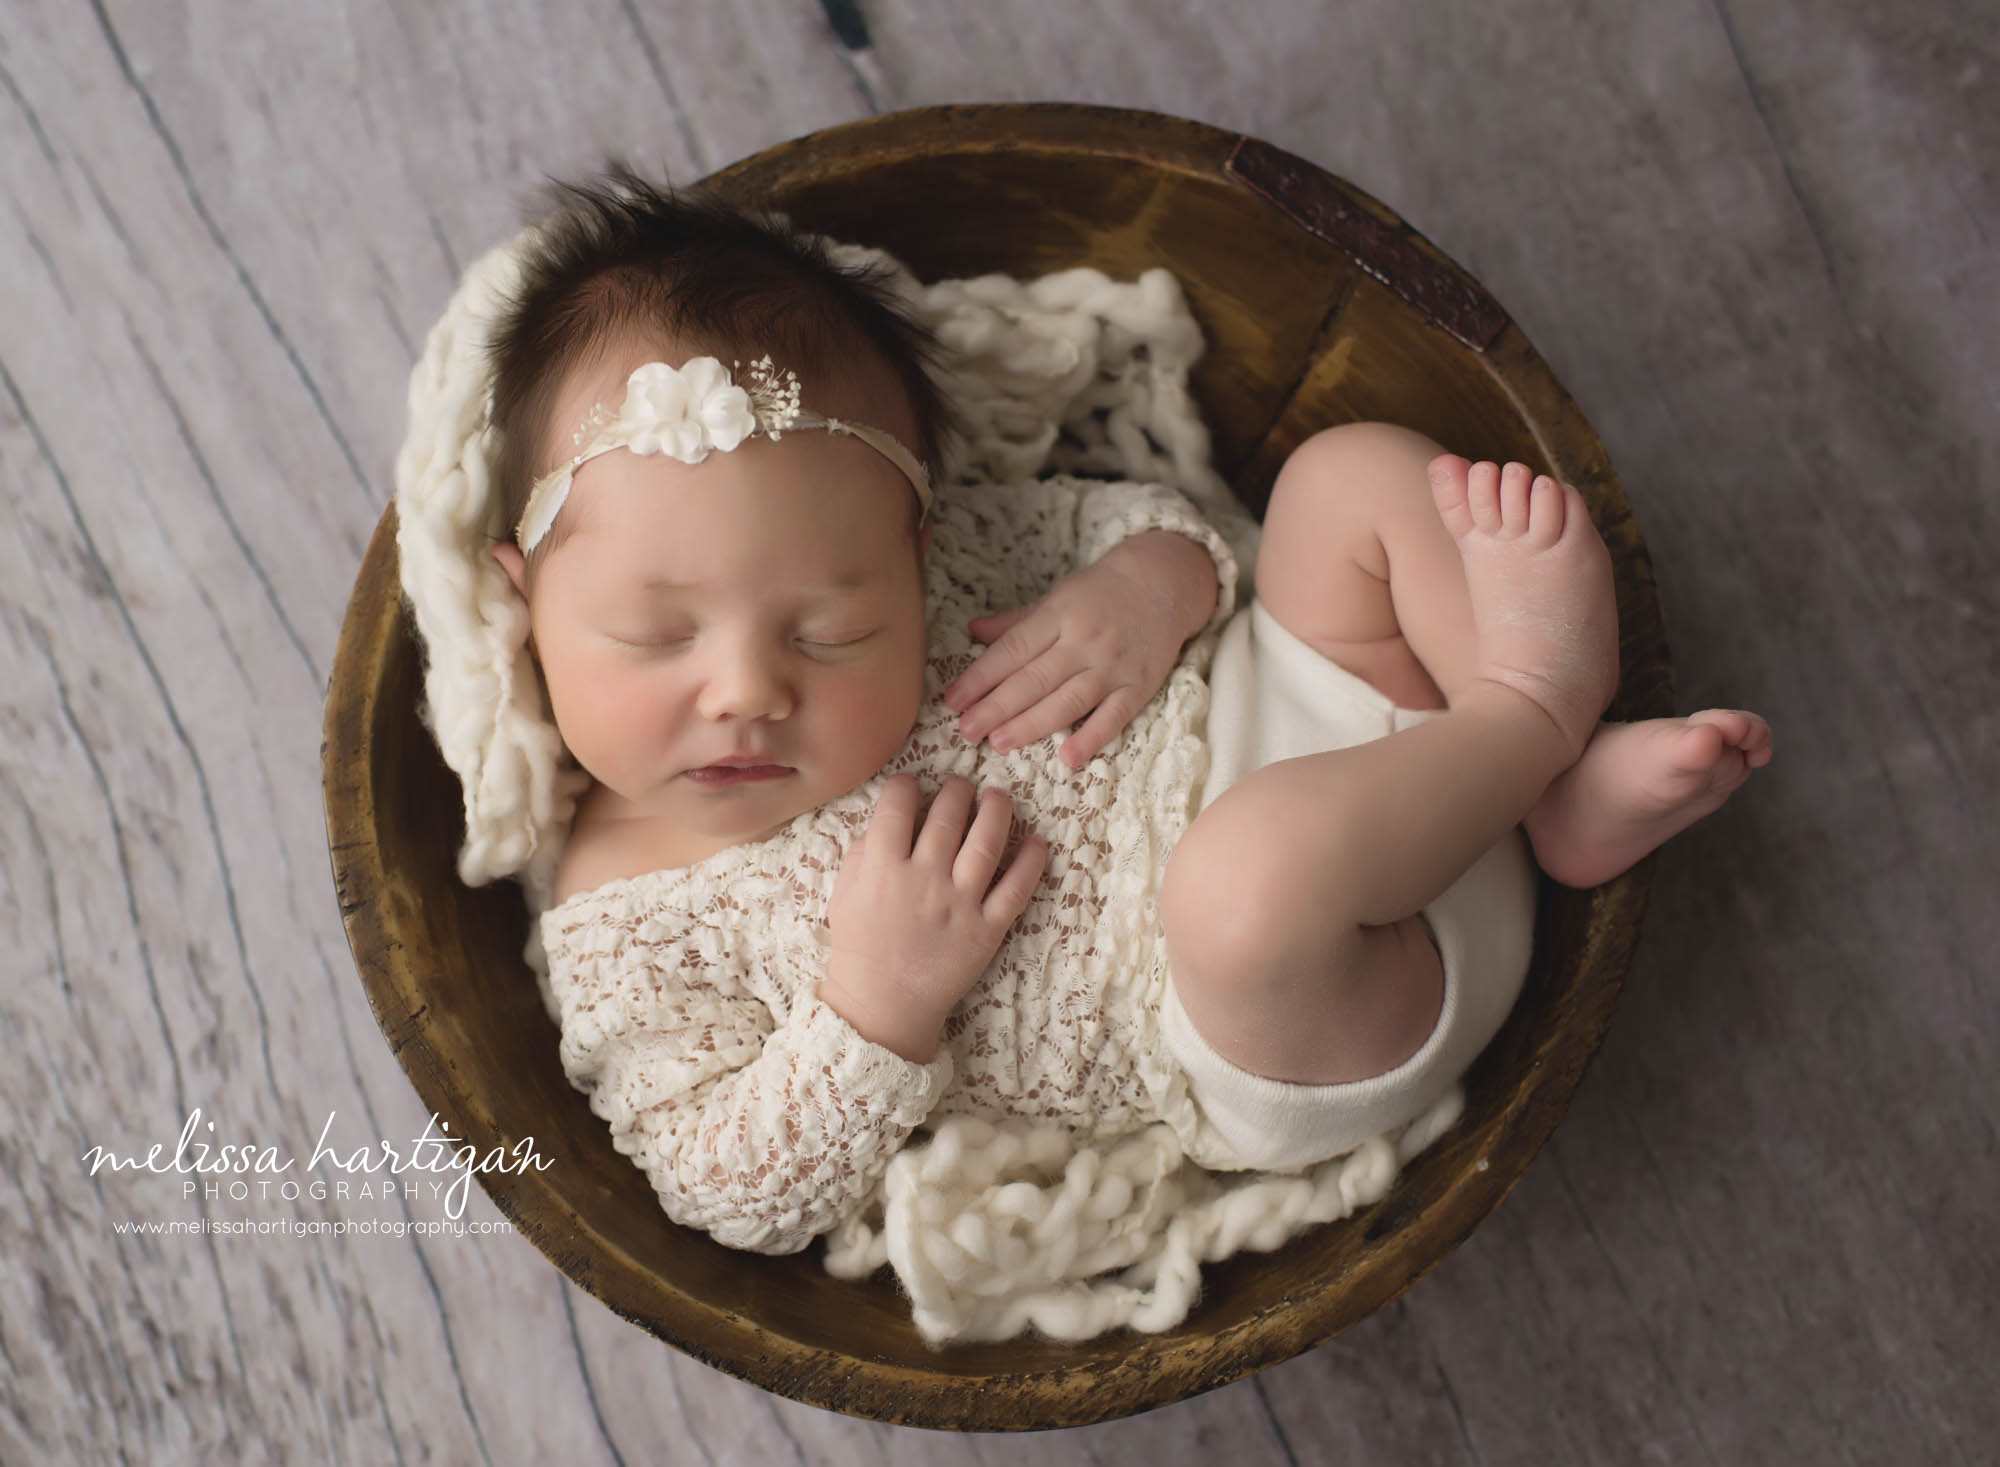 newborn baby girl posed in wooden bowl with cream coloured outfit